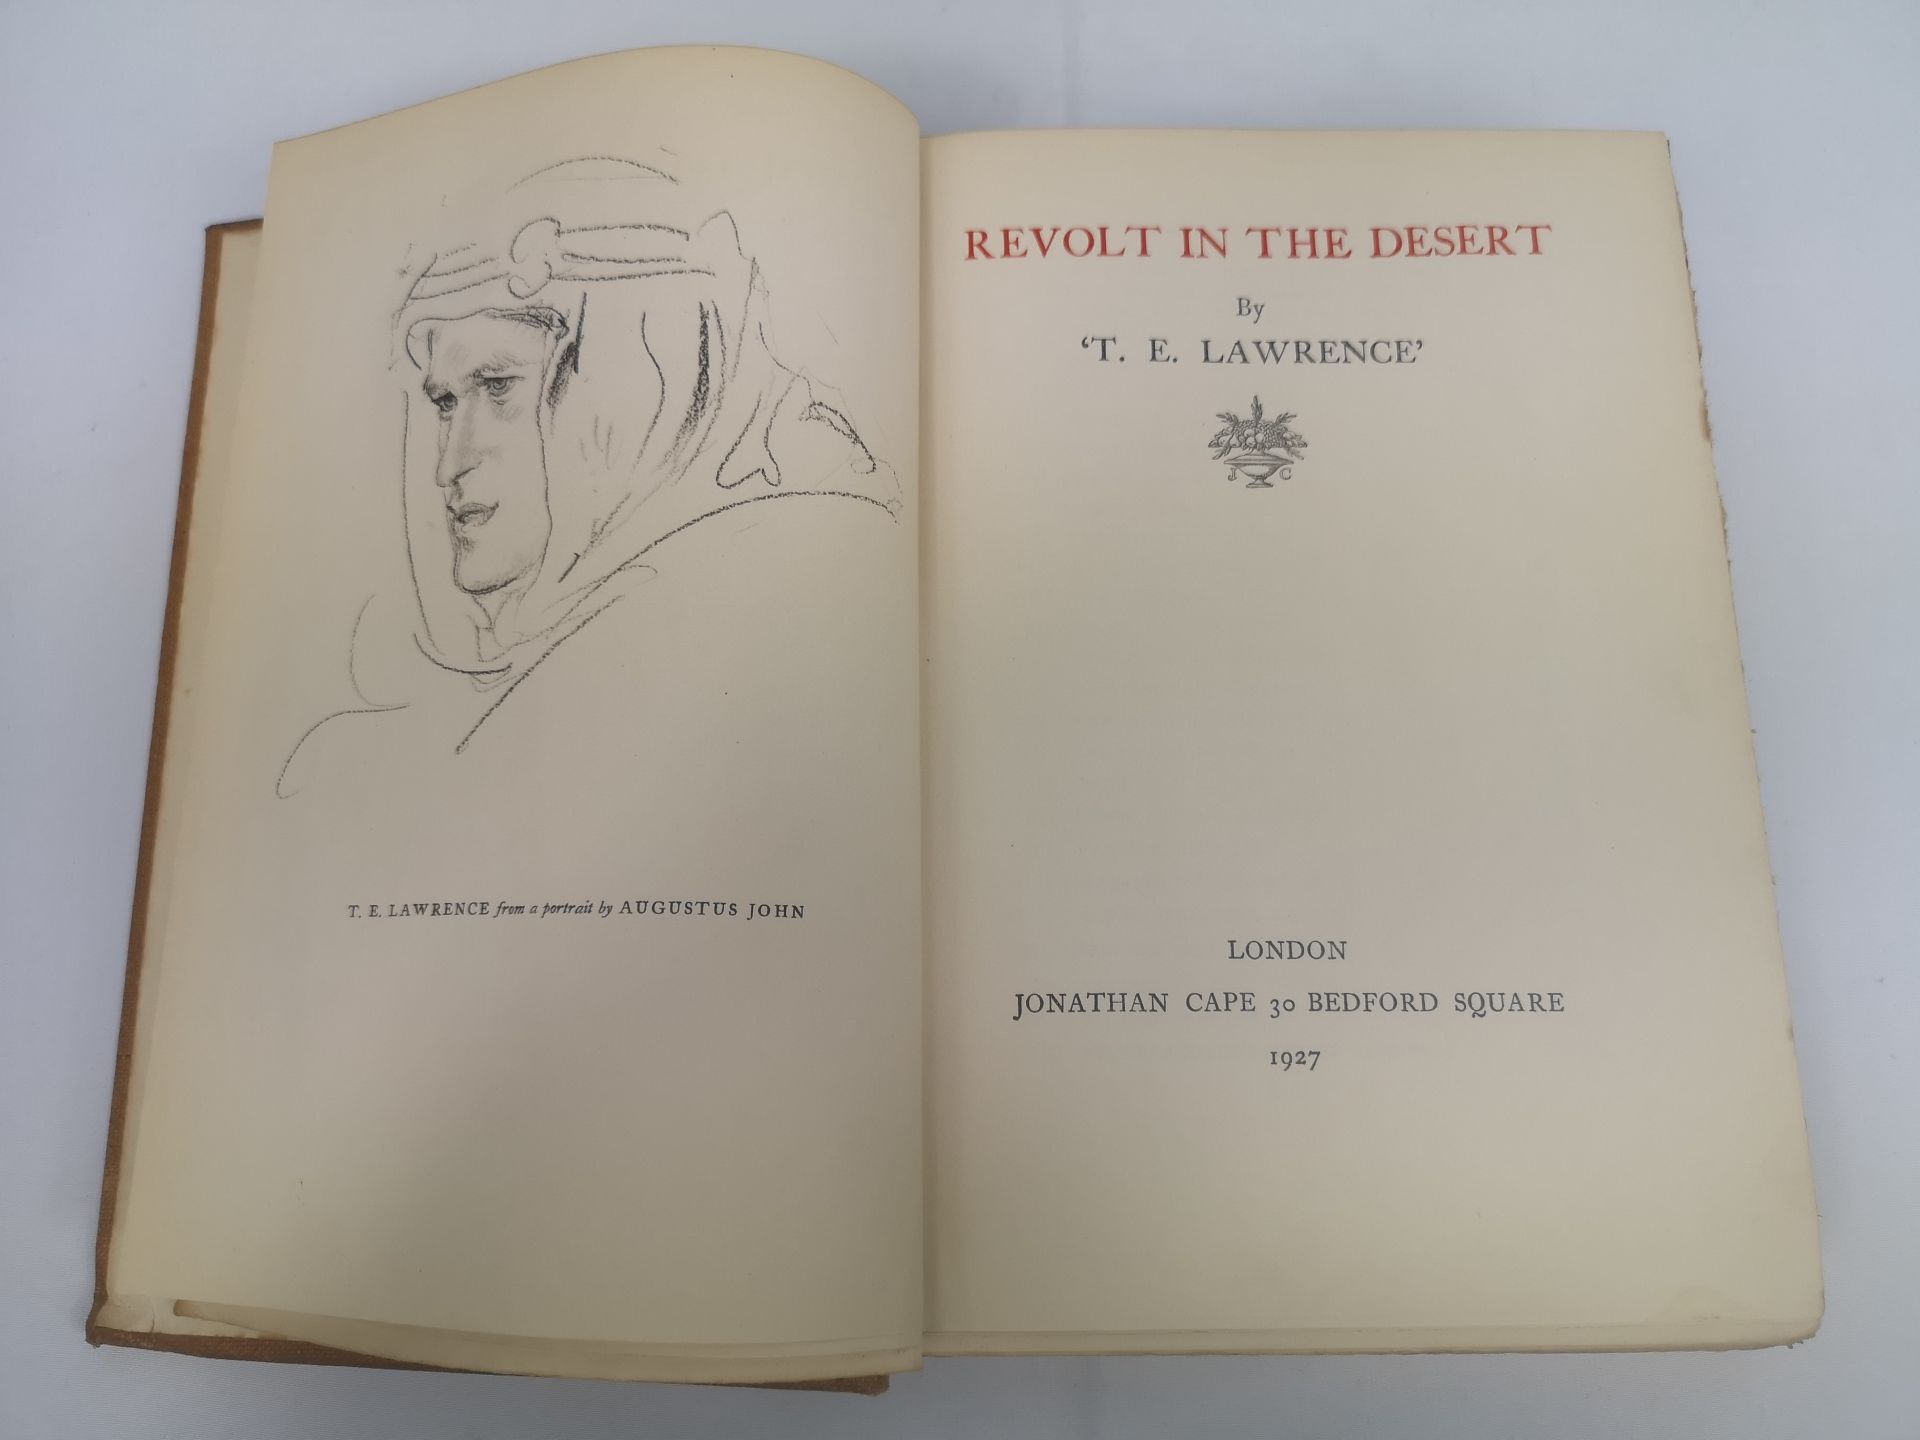 The Lost Oases by A.M.Hassanein Bey; together with Revolt in the Desert by T.E. Lawrence - Image 6 of 8